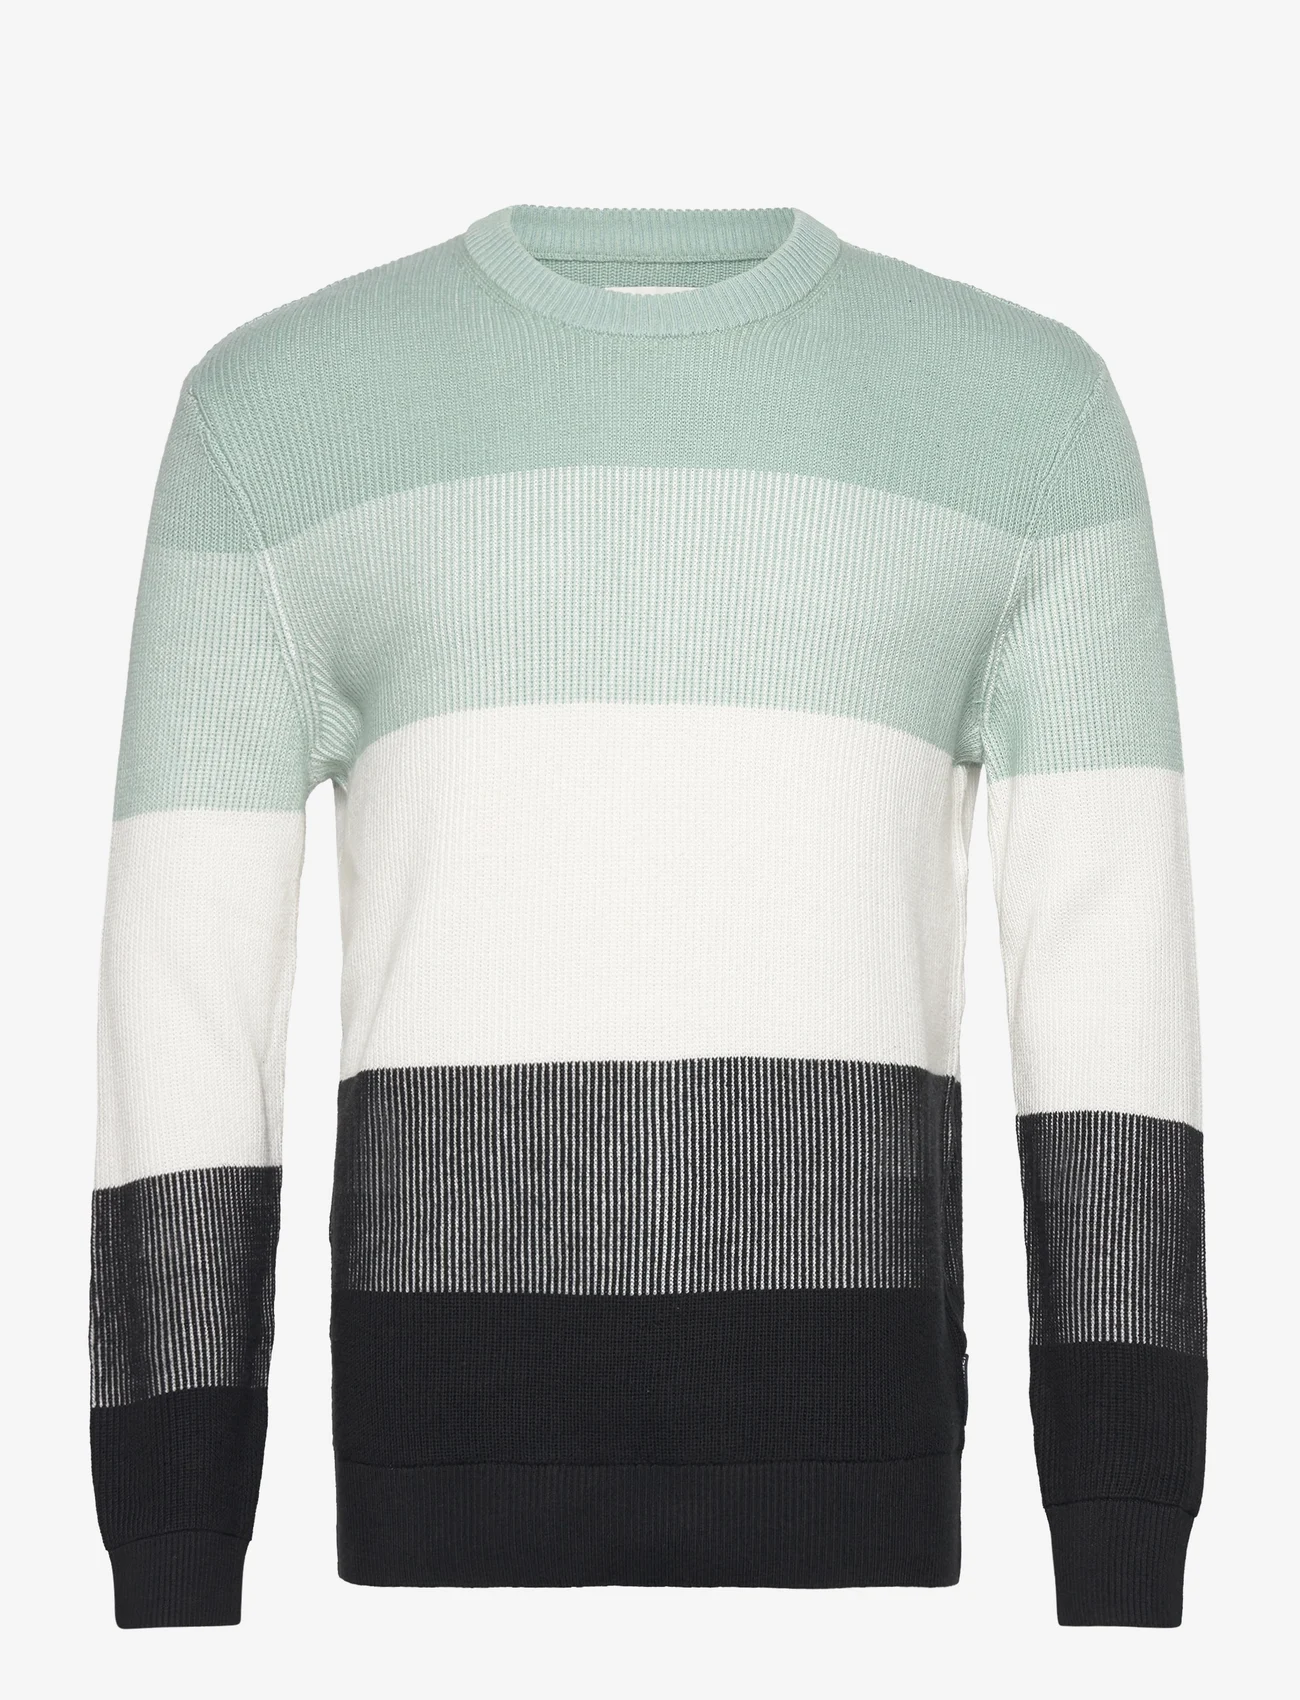 Tom Tailor - structured colorblock  knit - rund hals - mint white black colorblock - 0